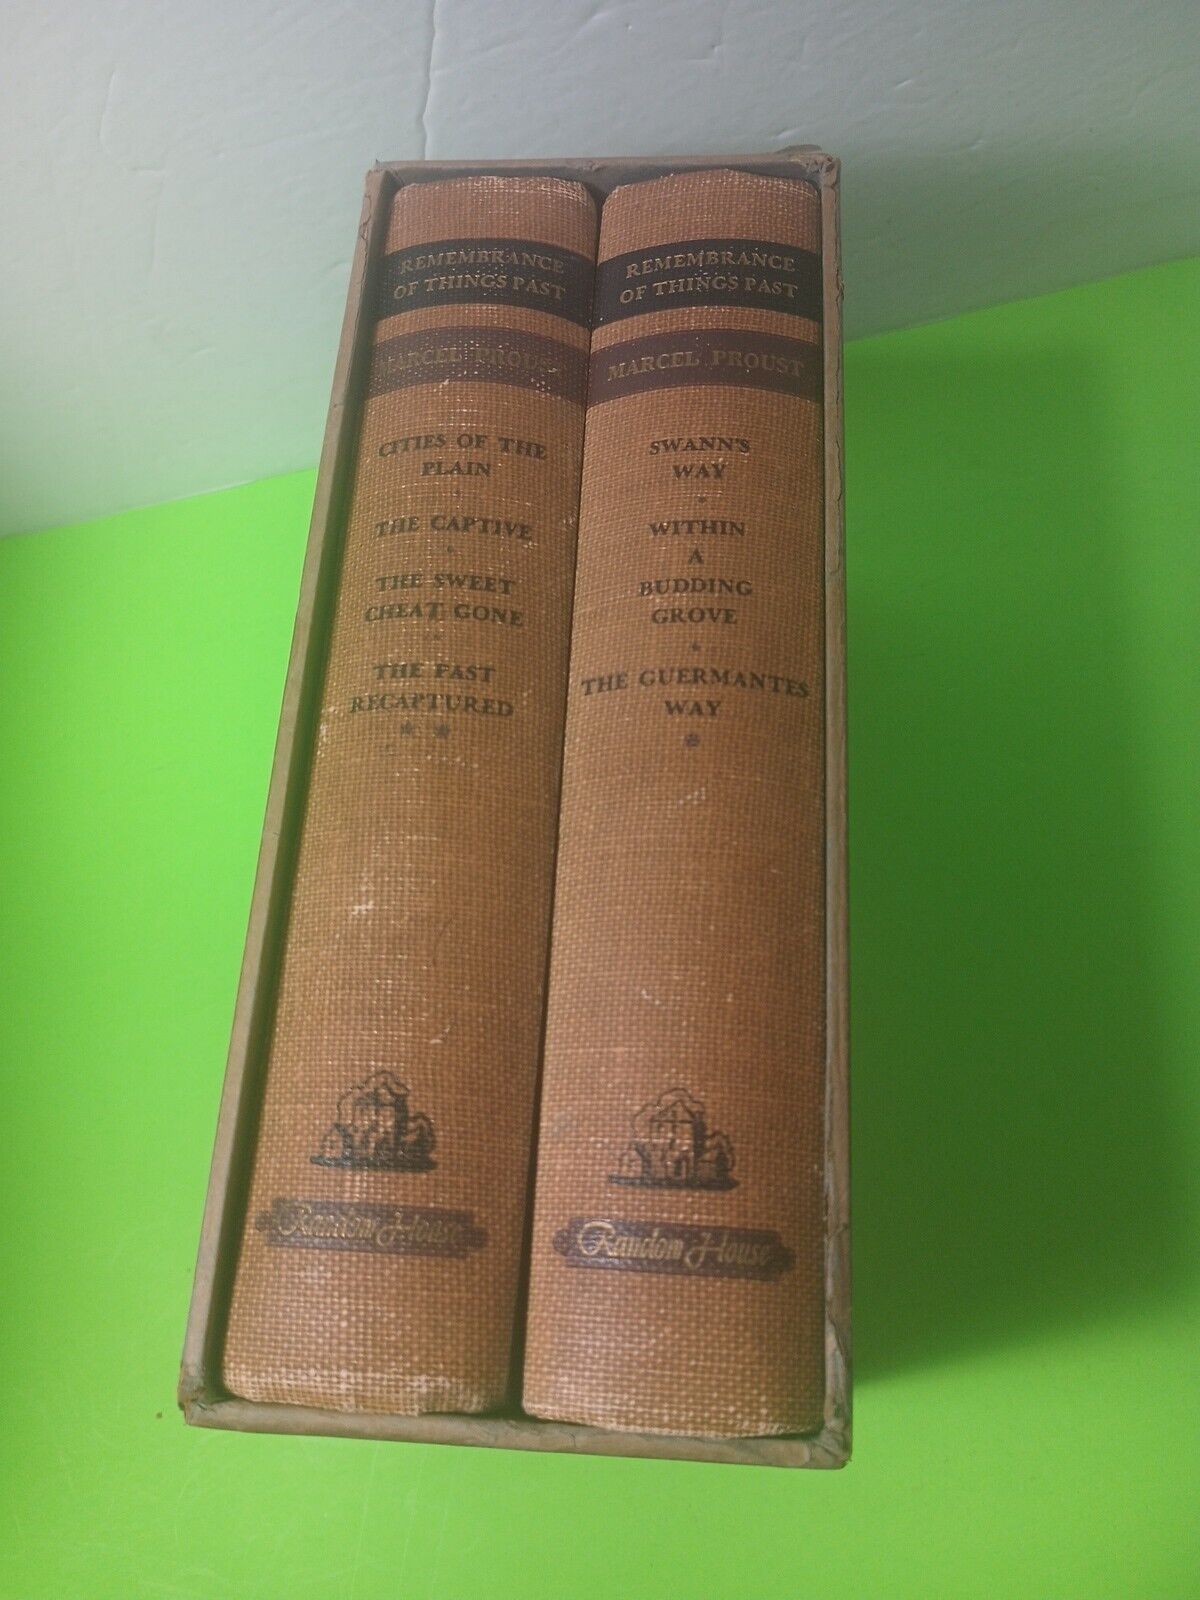 1934 MARCEL PROUST Remembrance of Things Past Complete 2 Volume Set w/ Slipcase